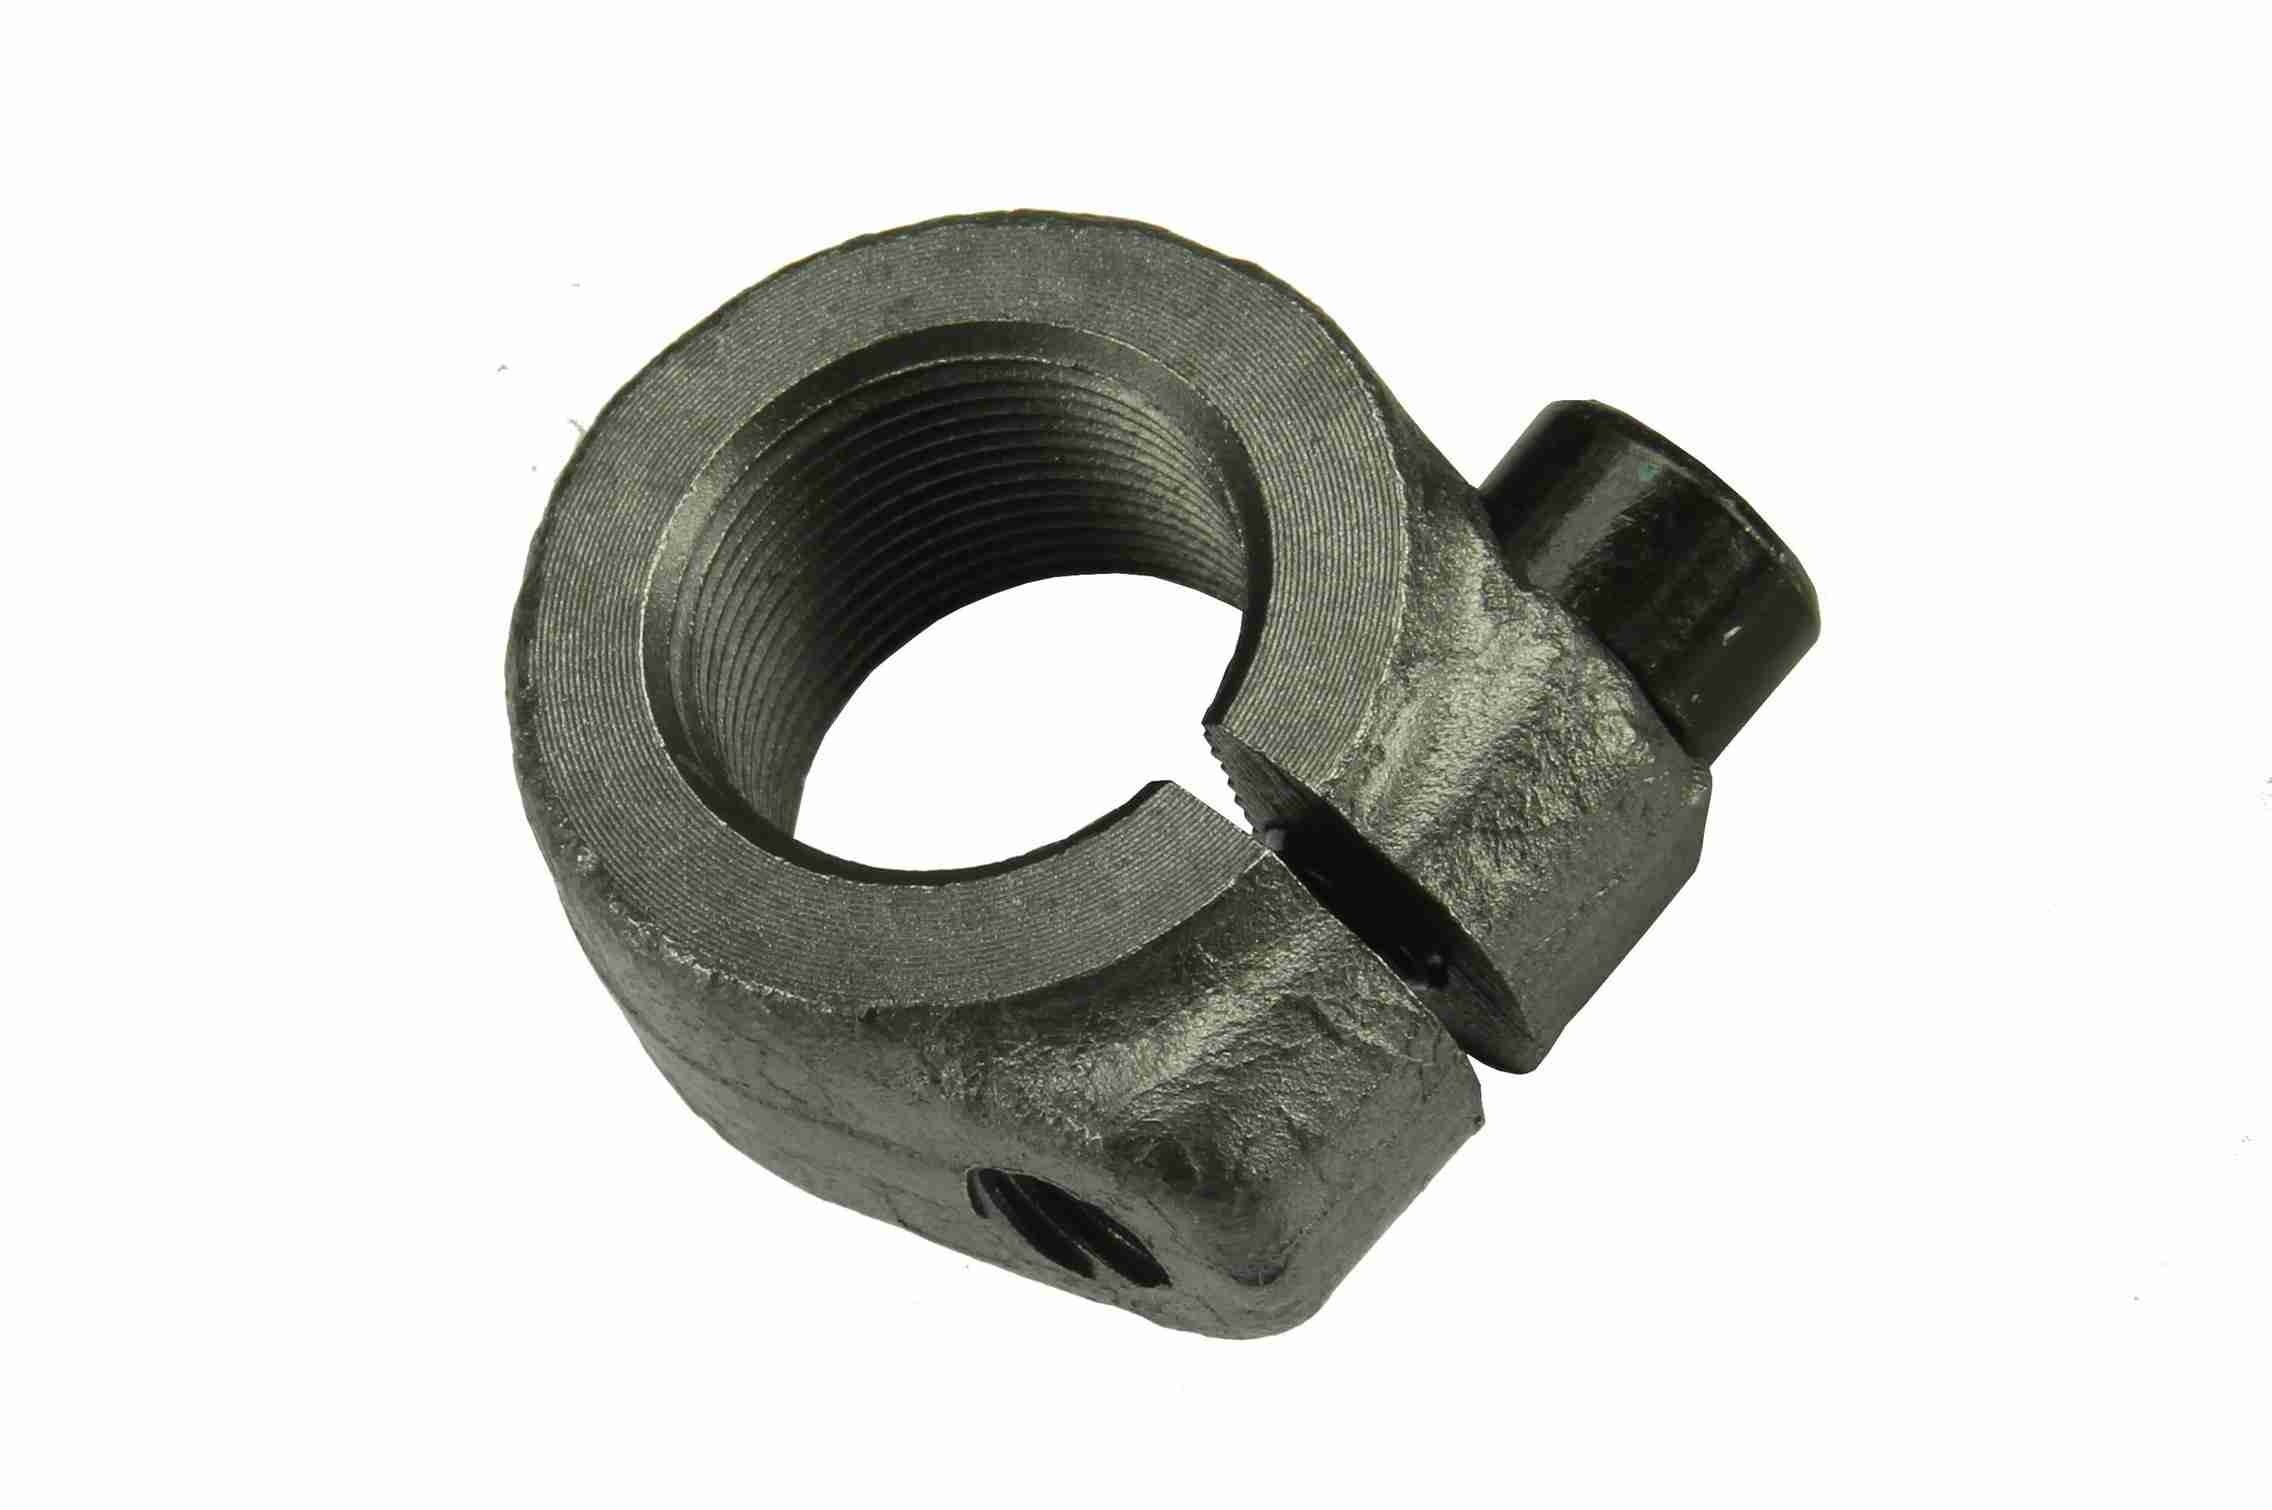 Clamping Nut On Steering Knuckle 924 924s 944 951 968 all 1976 to 1995 